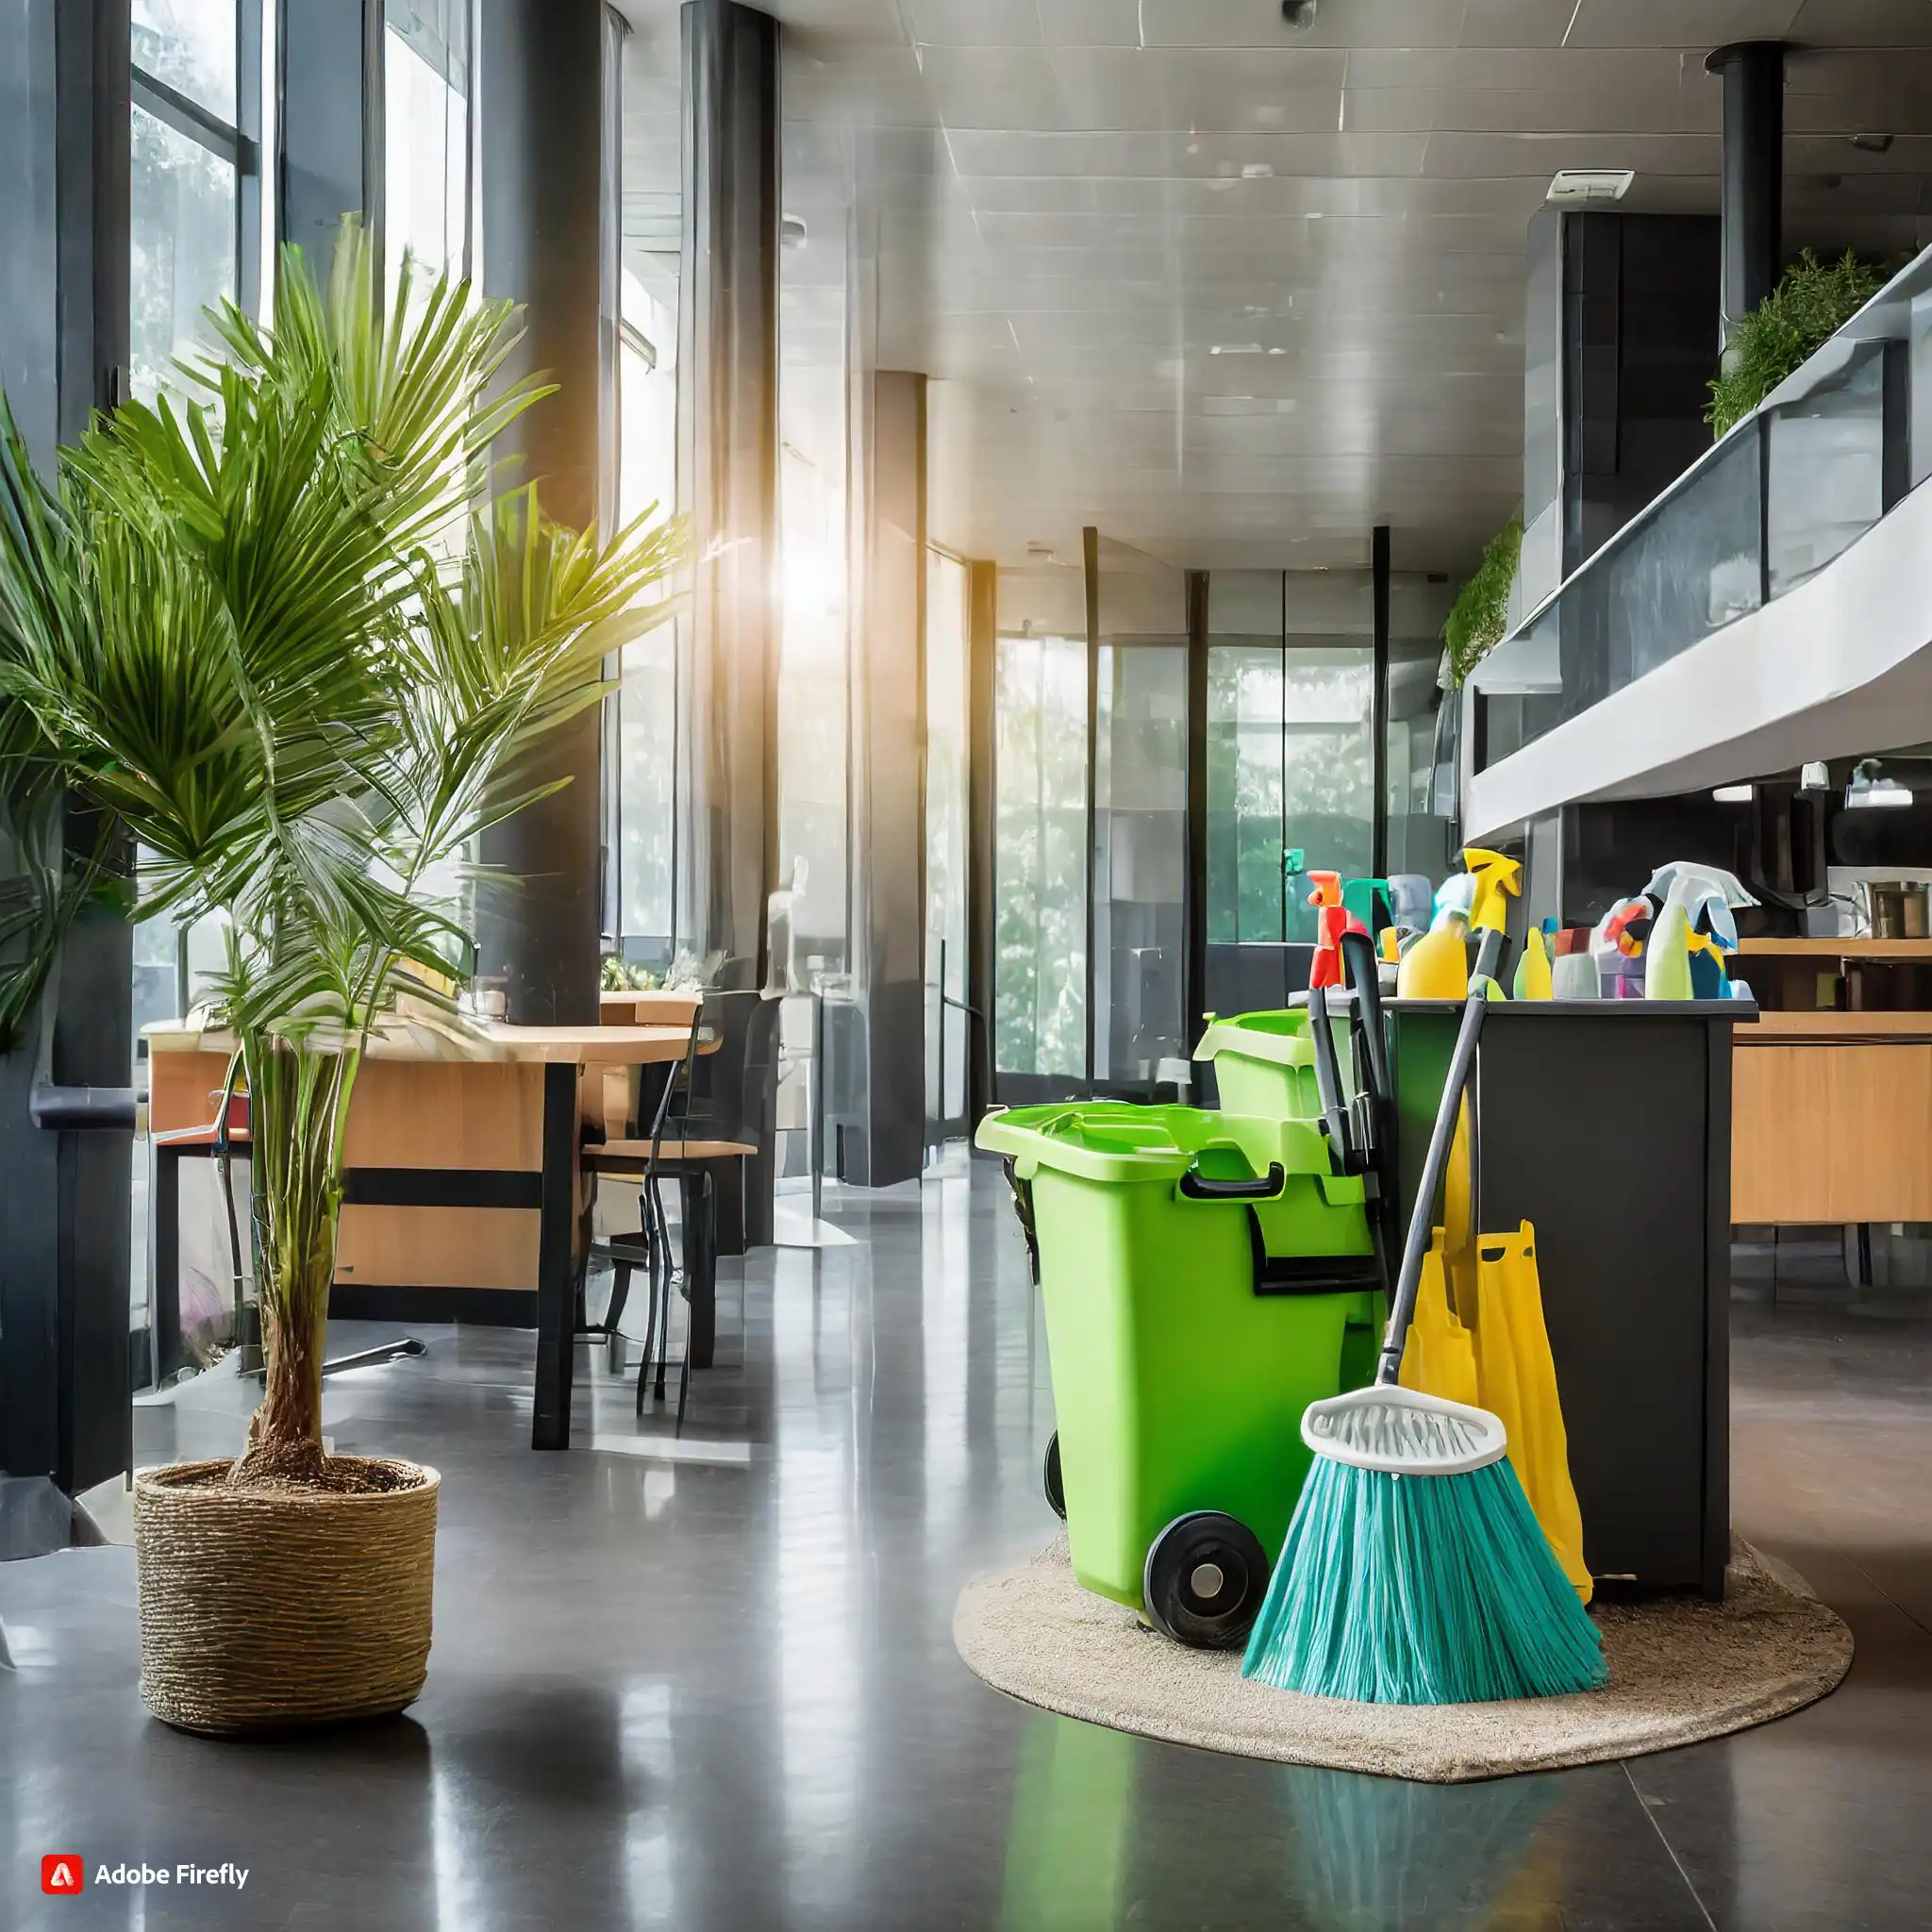 Minnesota Specialty Commercial Cleaning Services